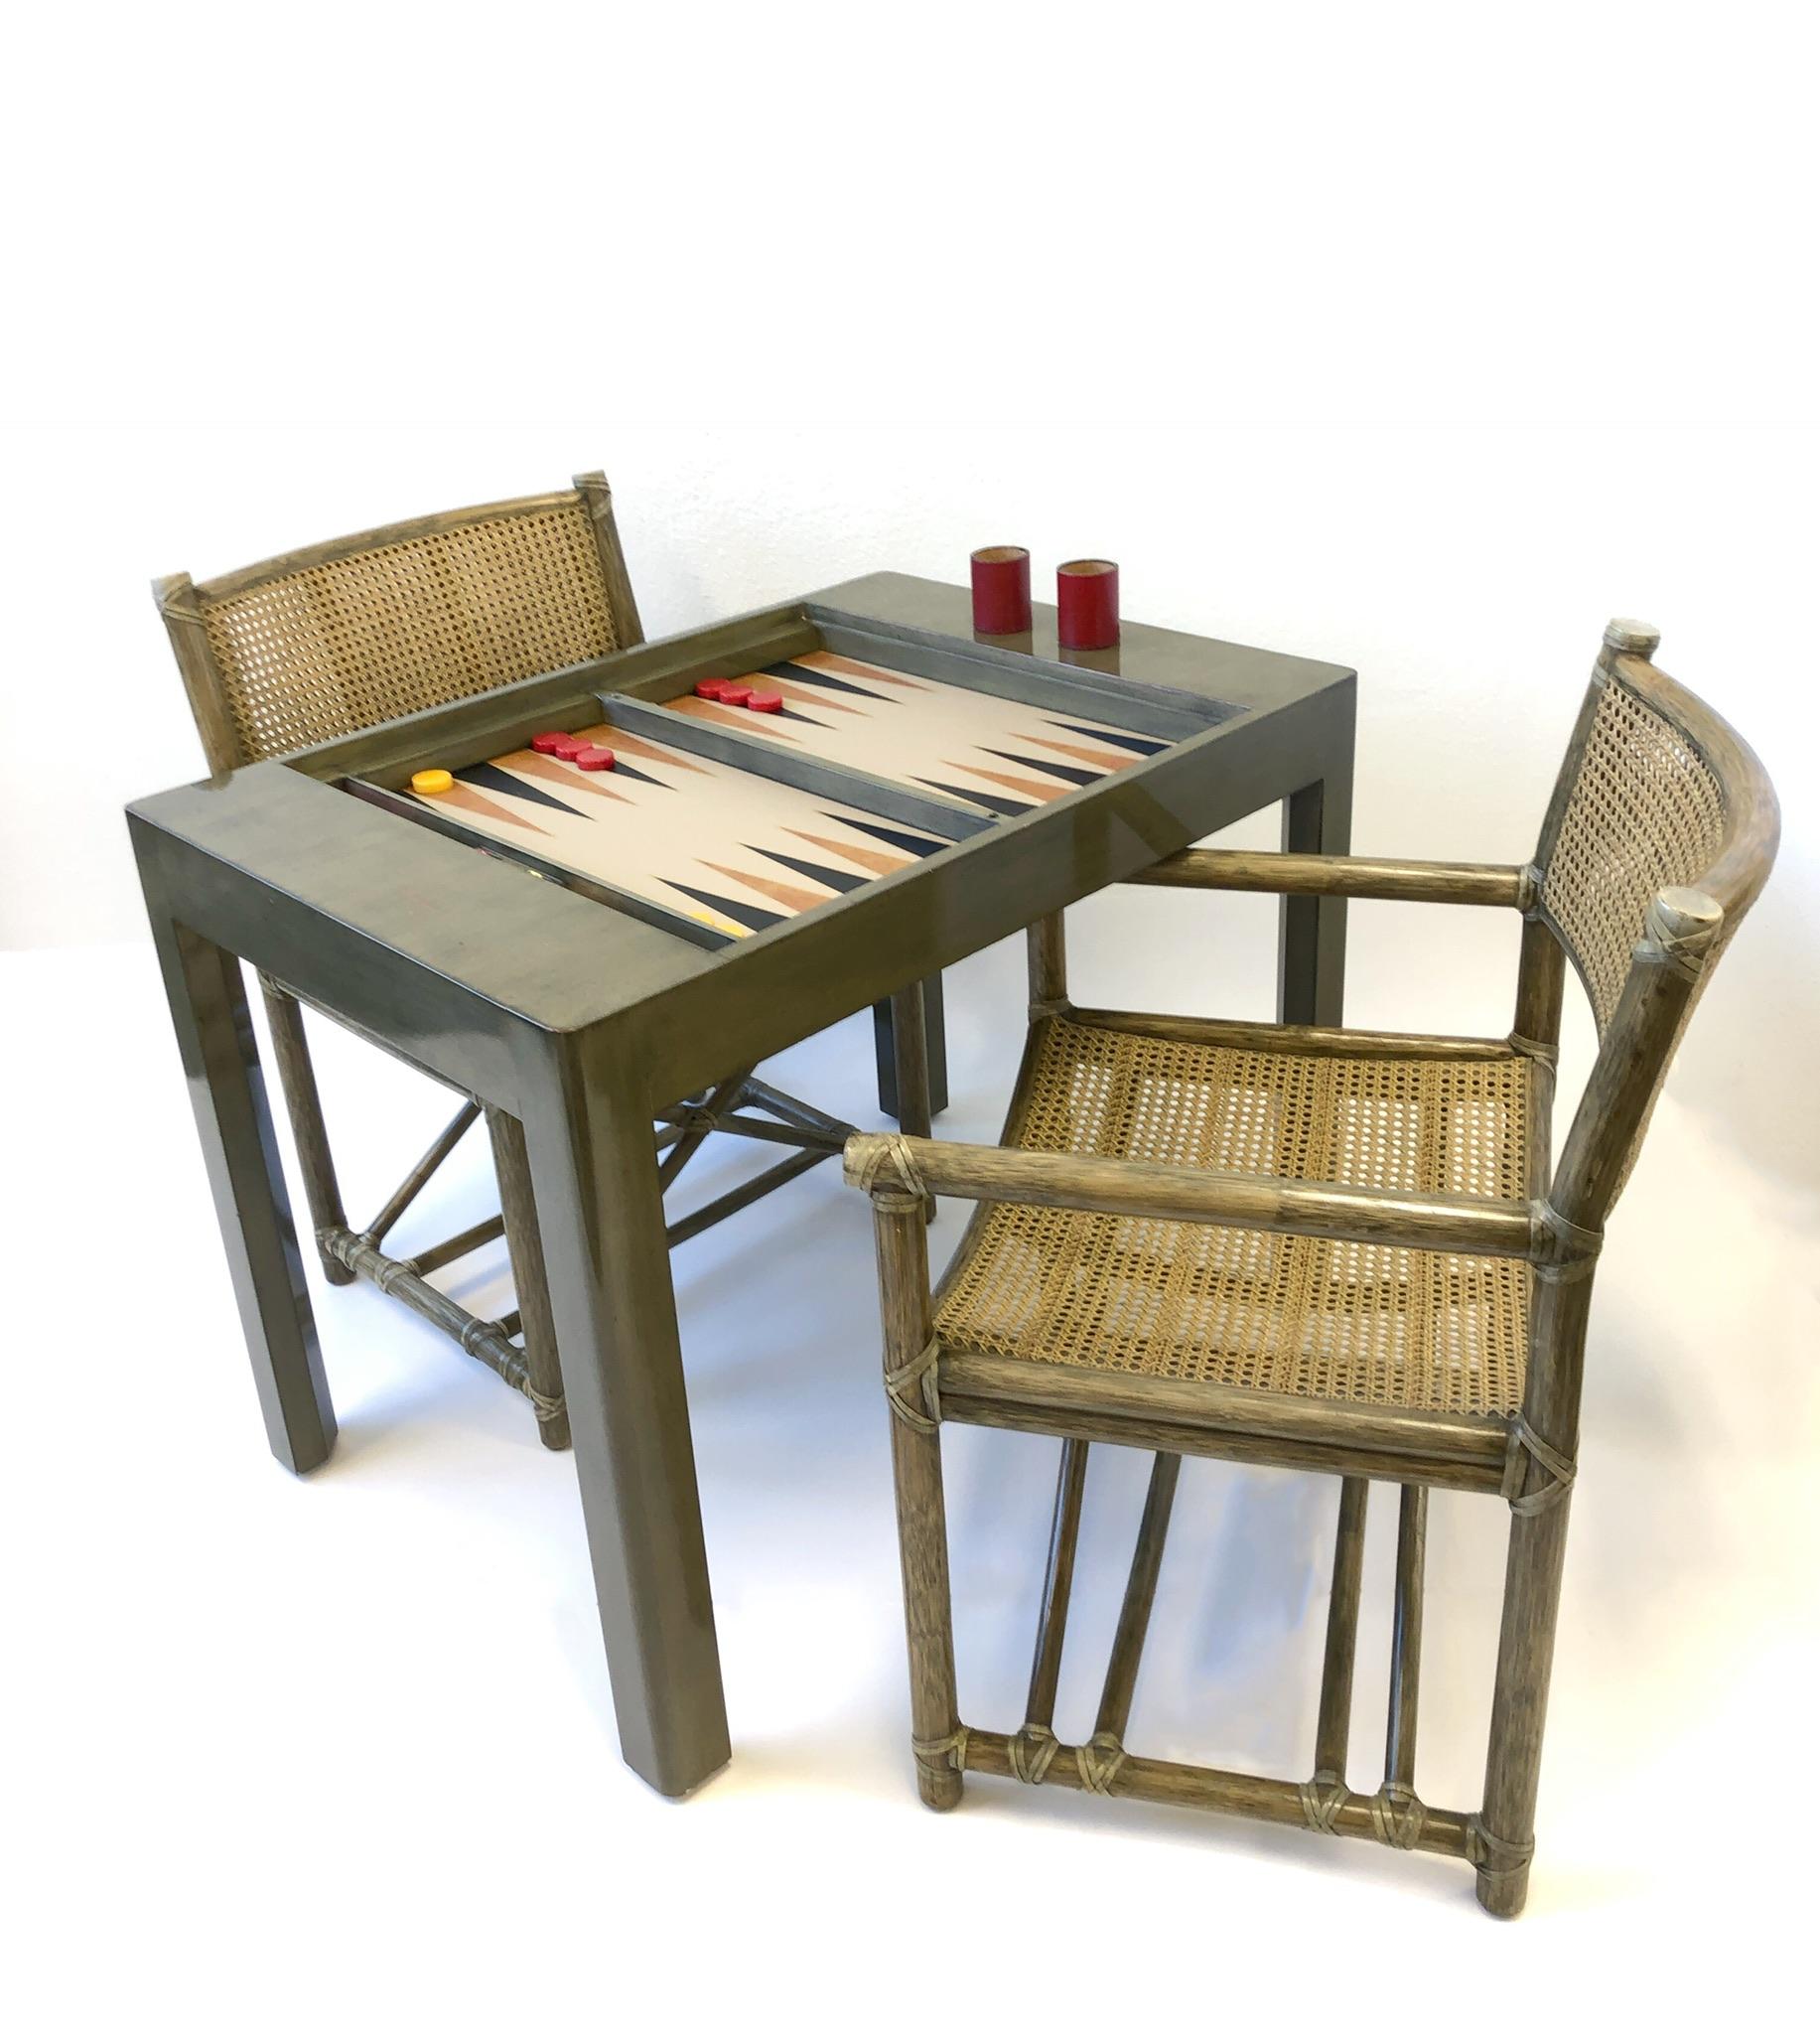 A spectacular backgammon game table set out of Bob and Dolores Hopes home. The table is by Steve Chase. The table has a inset top so you can play cards or other games on it. The pair of cane arm chairs are by McGuire. The table was used, so it has